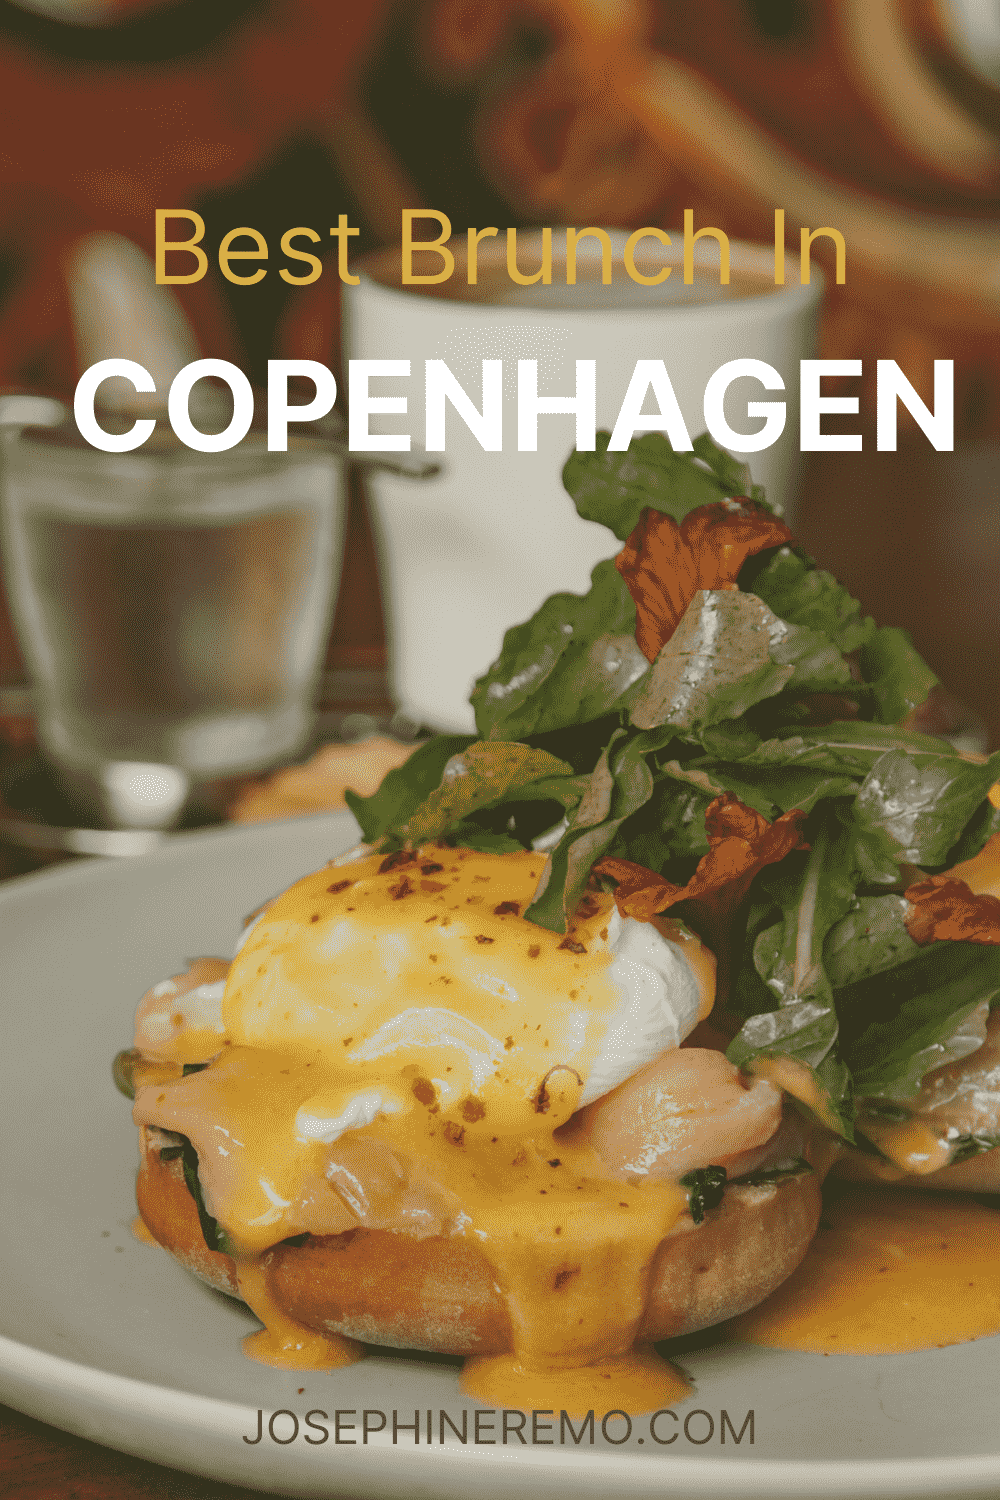 Blog post about places to get the best brunch in Copenhagen